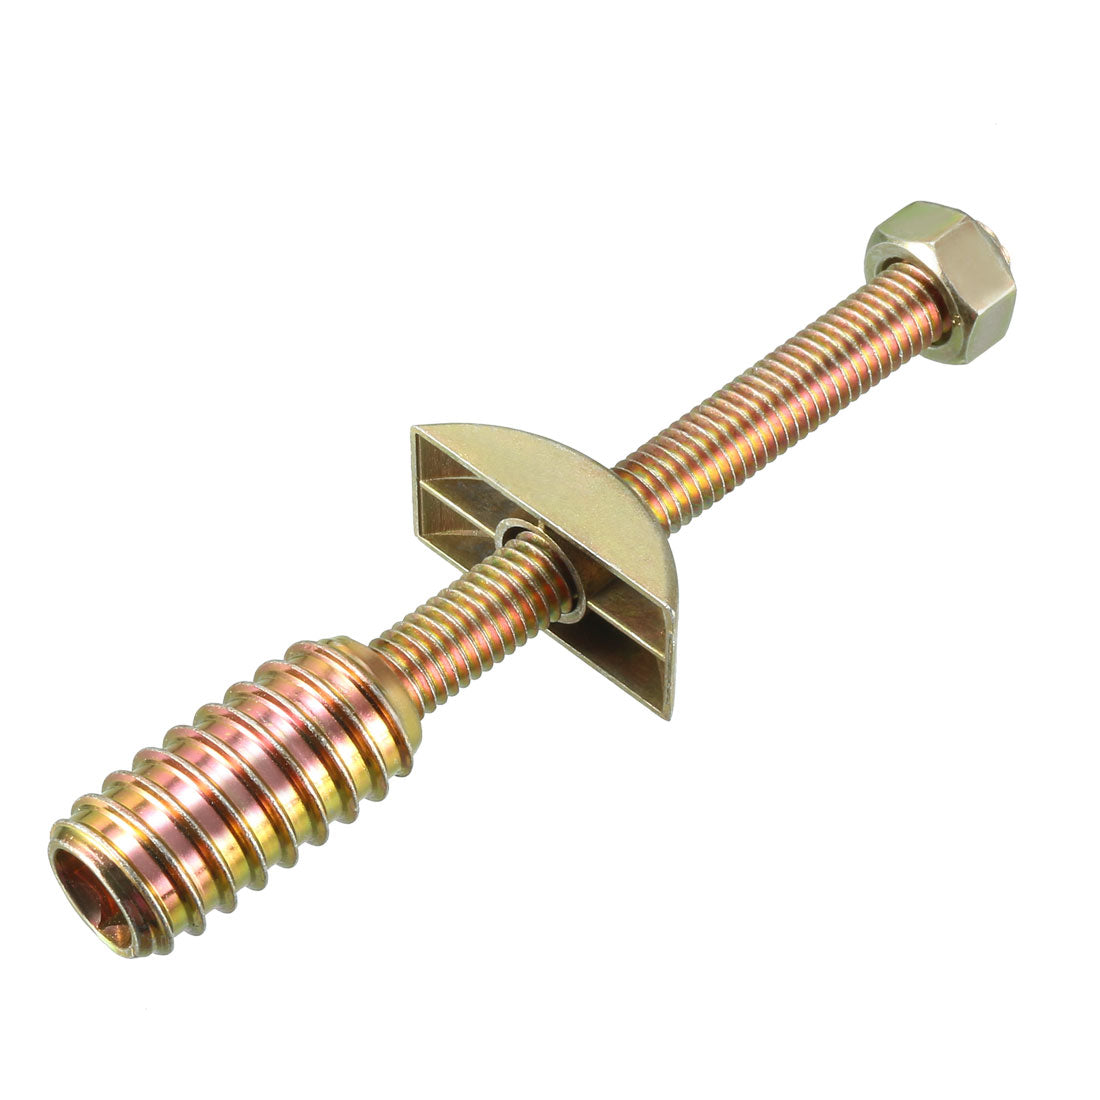 uxcell Uxcell 10 Sets Furniture Hardware Zinc Plated Half-Moon Nut Connecting Fitting Bronze Tone